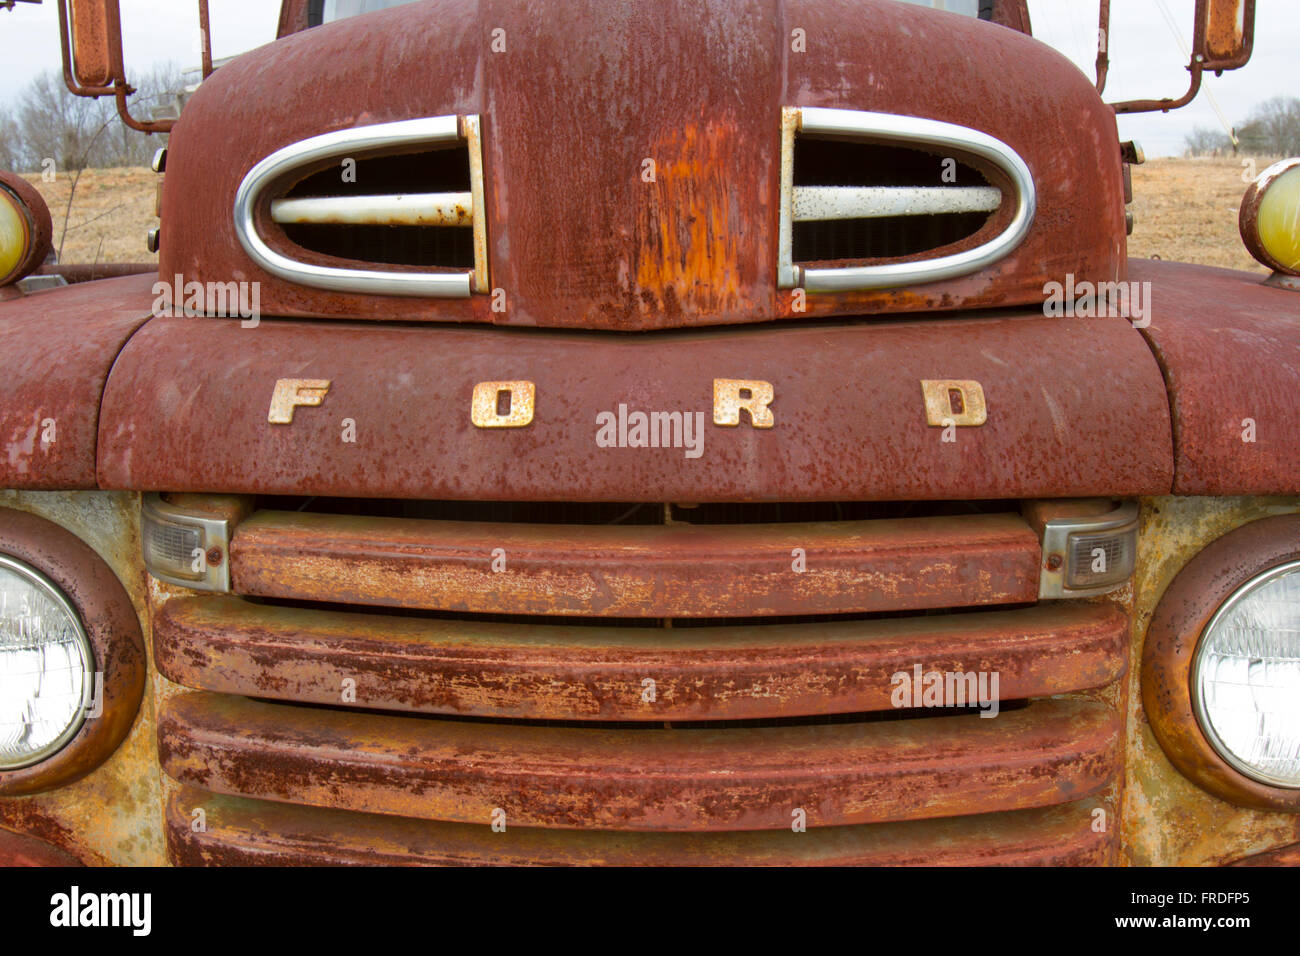 Columbia, VA, USA - March 12, 2016 :  Front grill of rusting Ford truck in field. Stock Photo